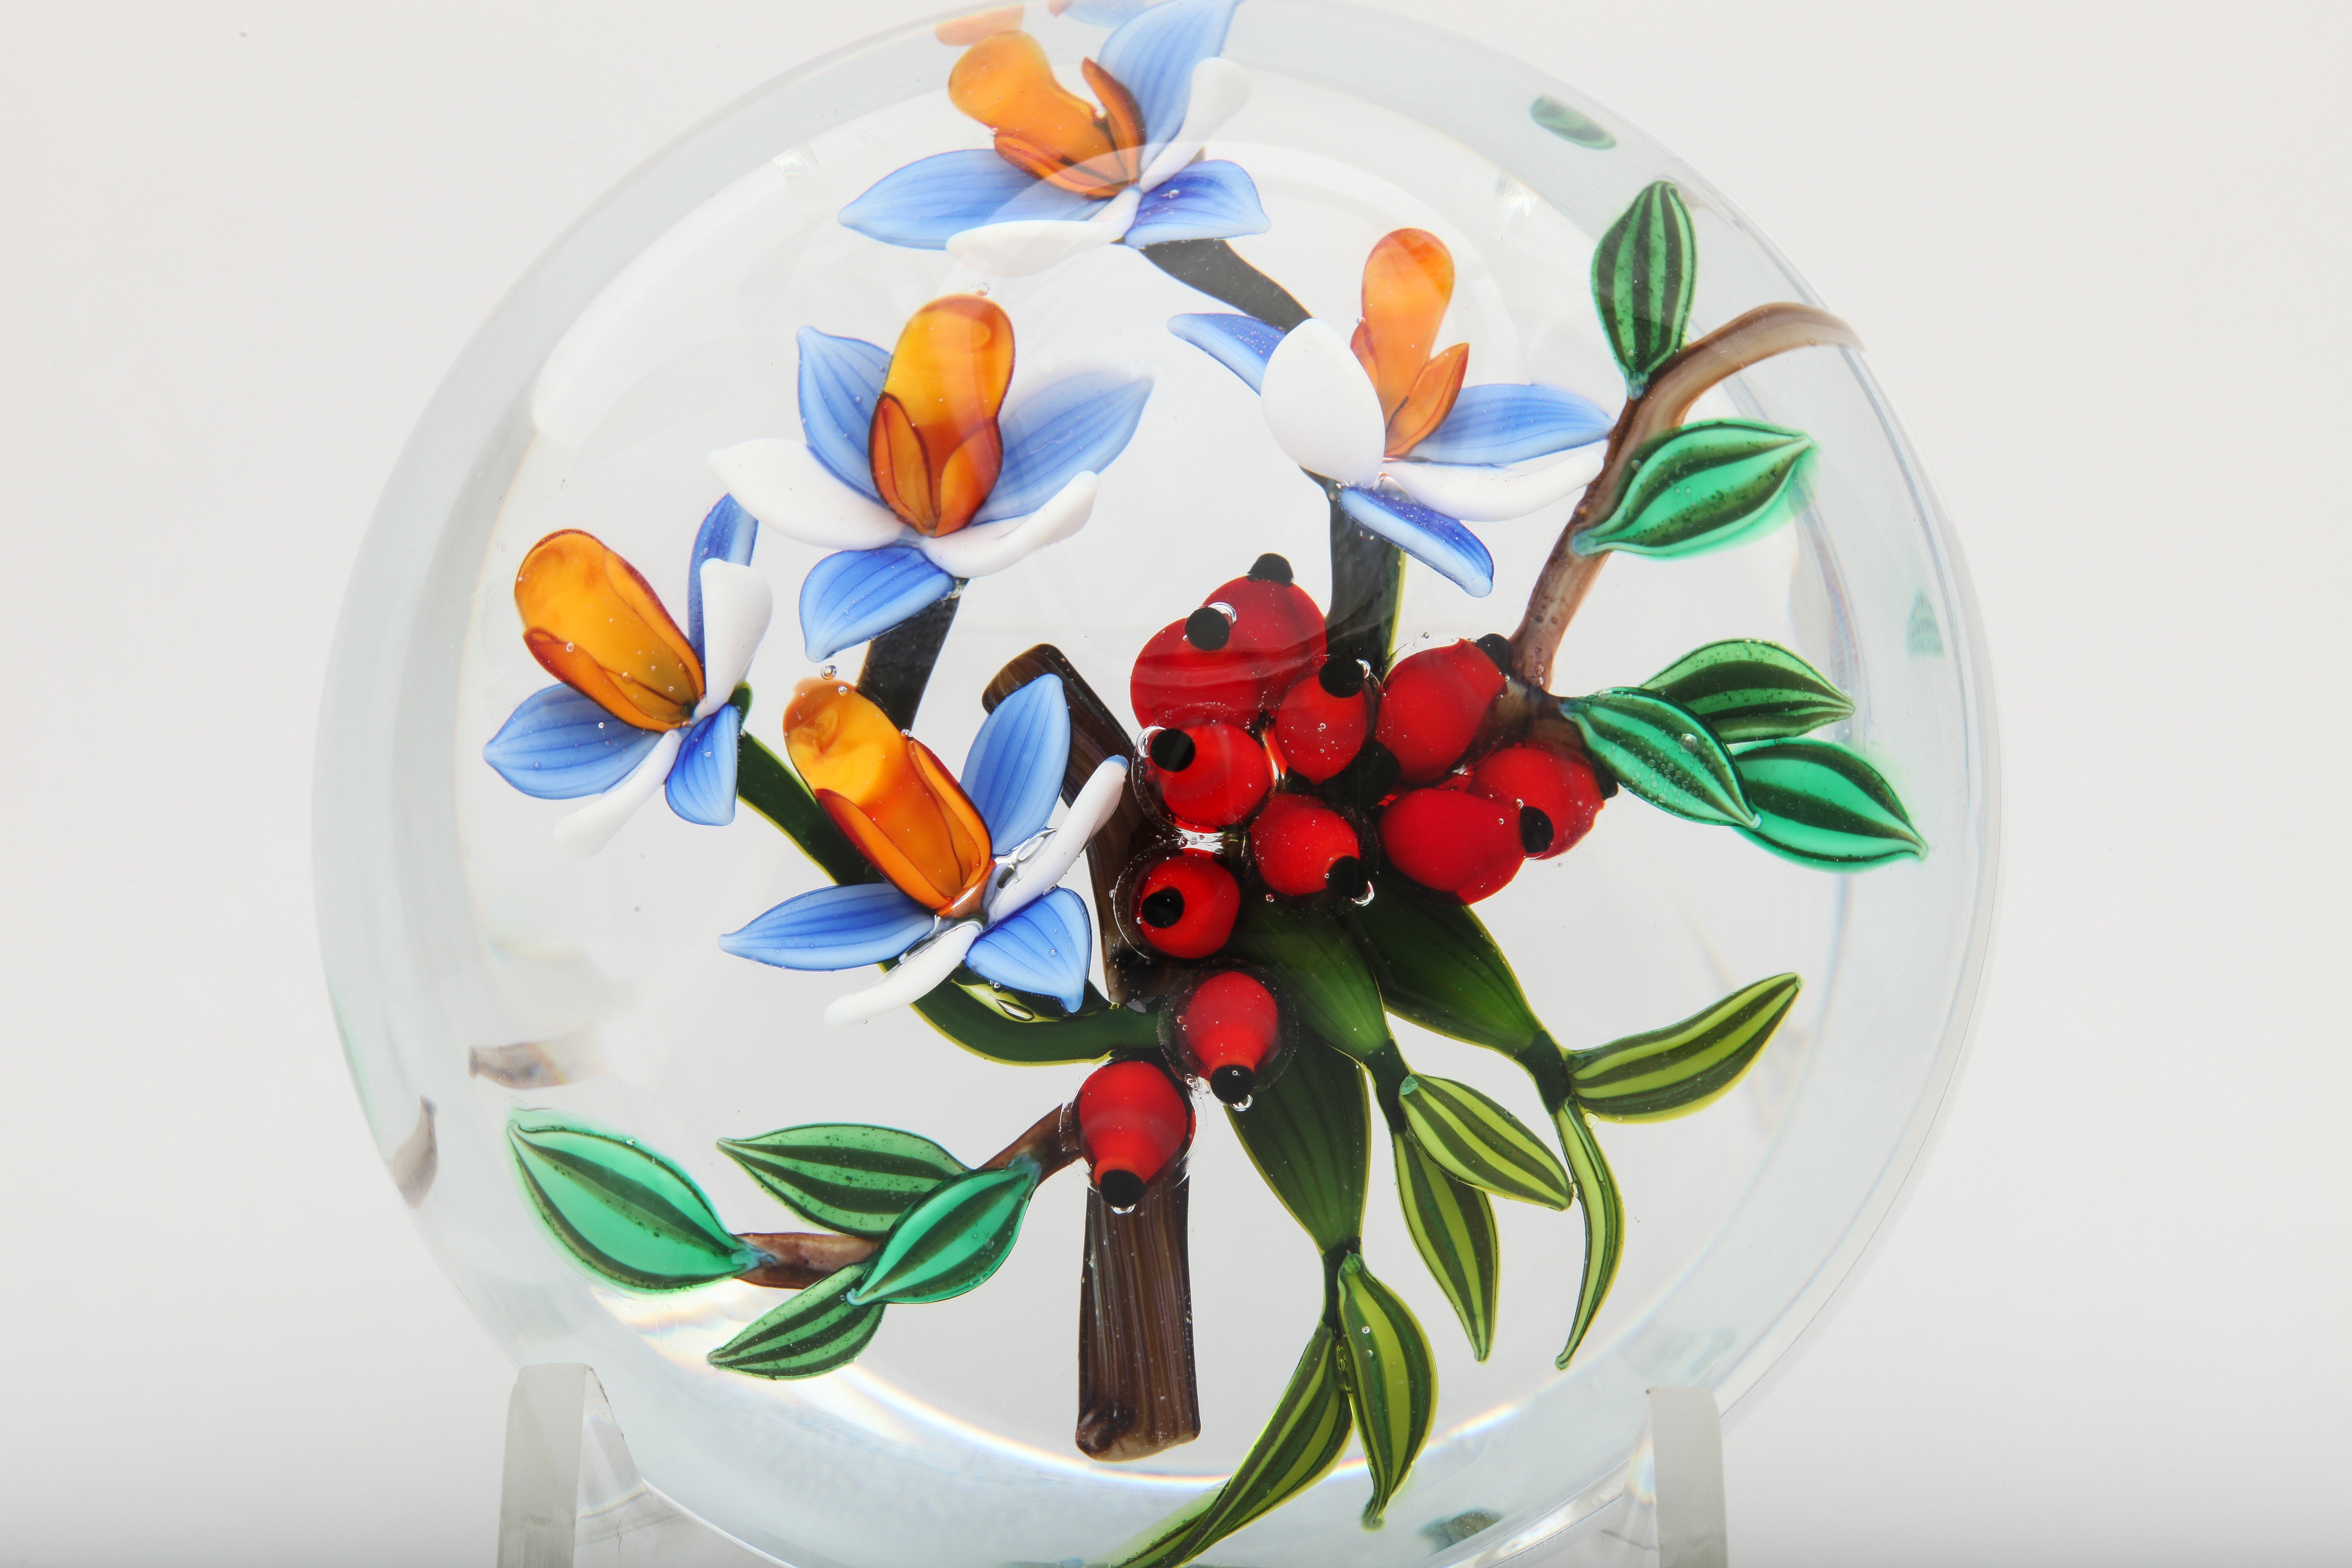 A beautiful Colin Richardson bouquet paperweight with blue, yellow and white orchids and red berries, signed Colin Richardson, 2015, 1/1